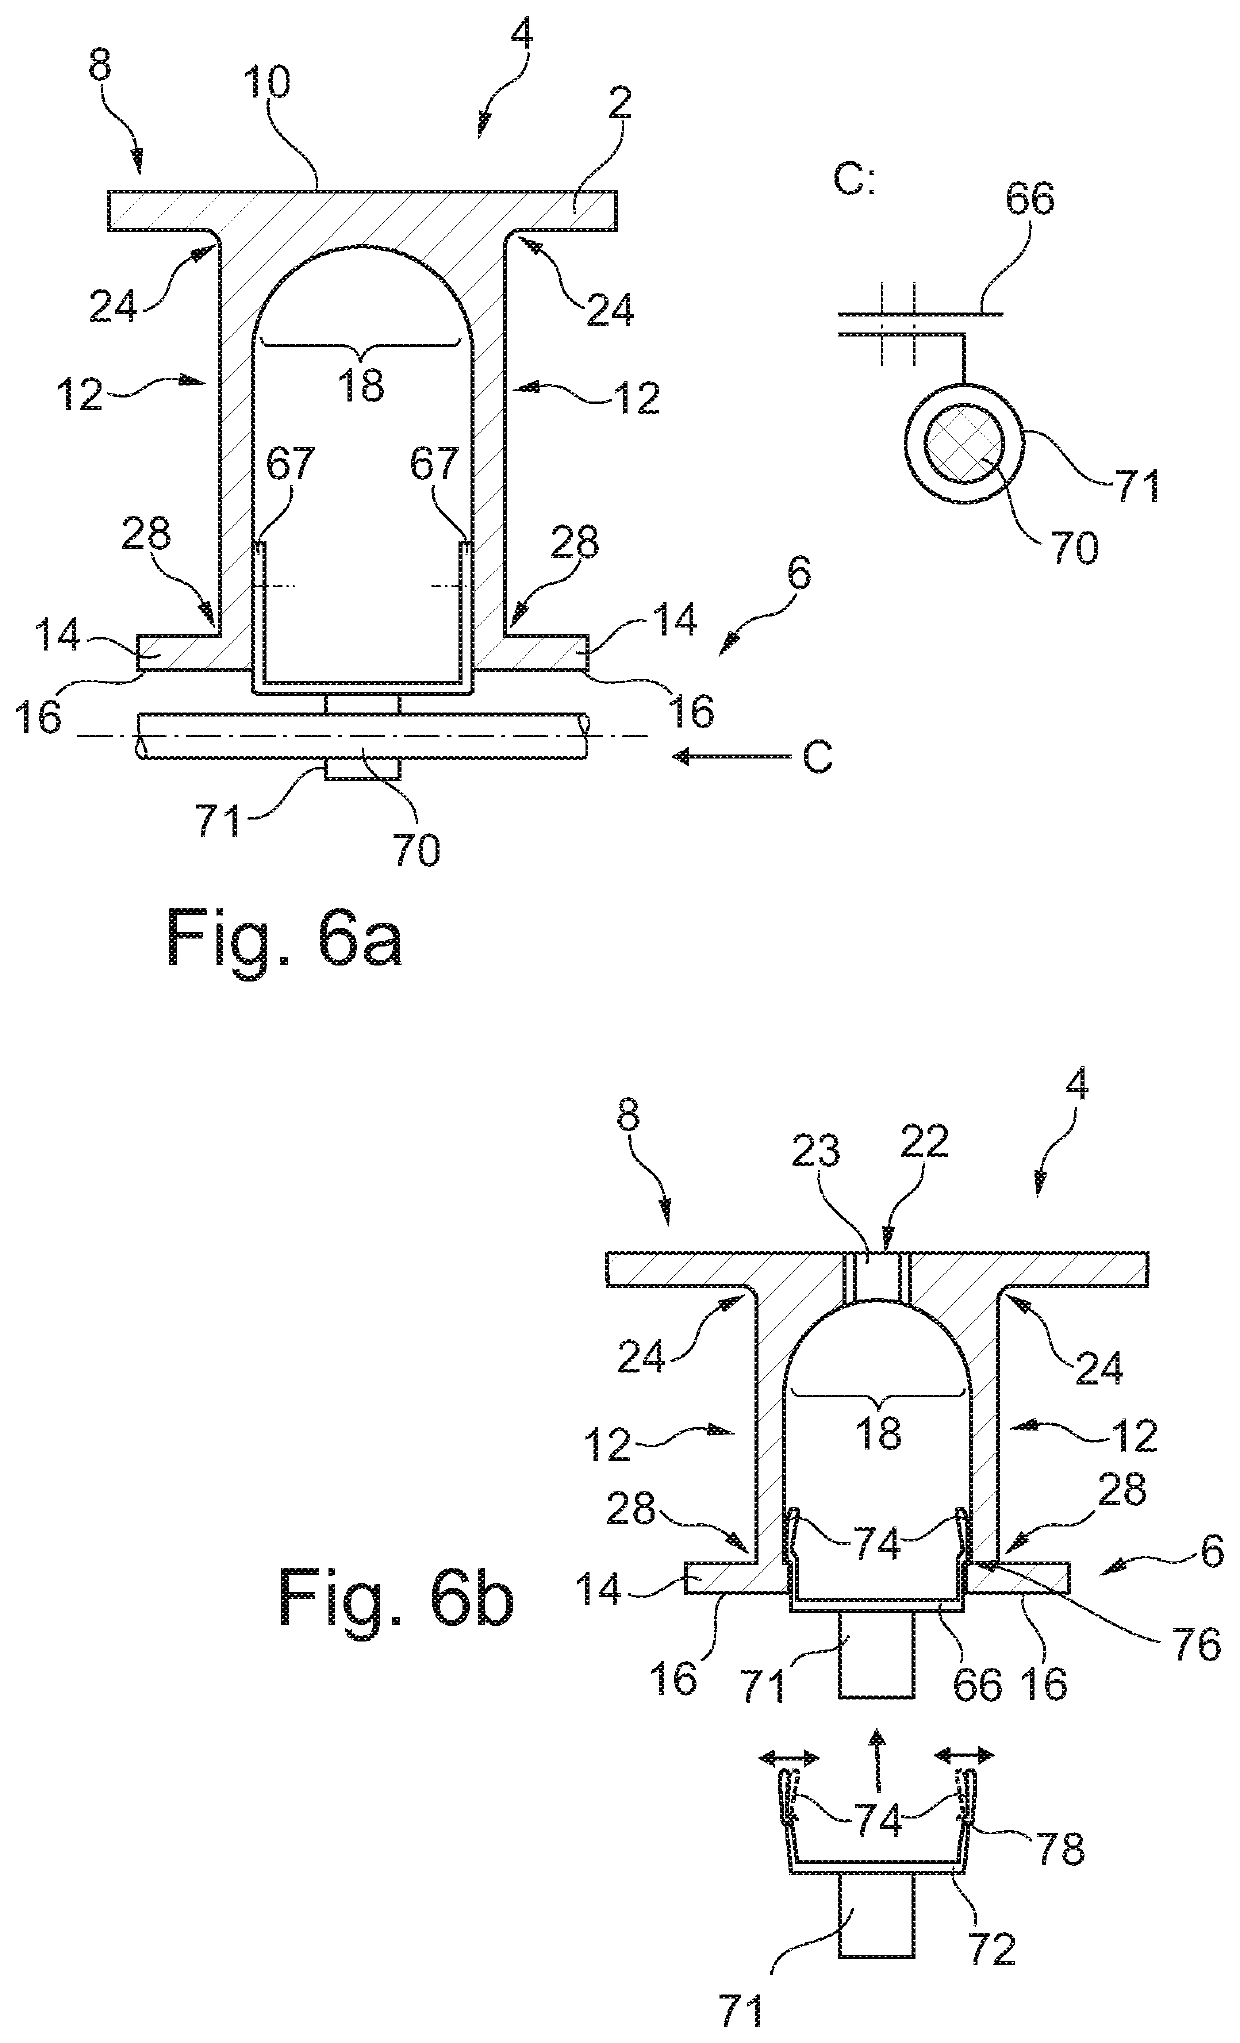 Rail Systems for Fixing Fittings in a Cabin of a Vehicle